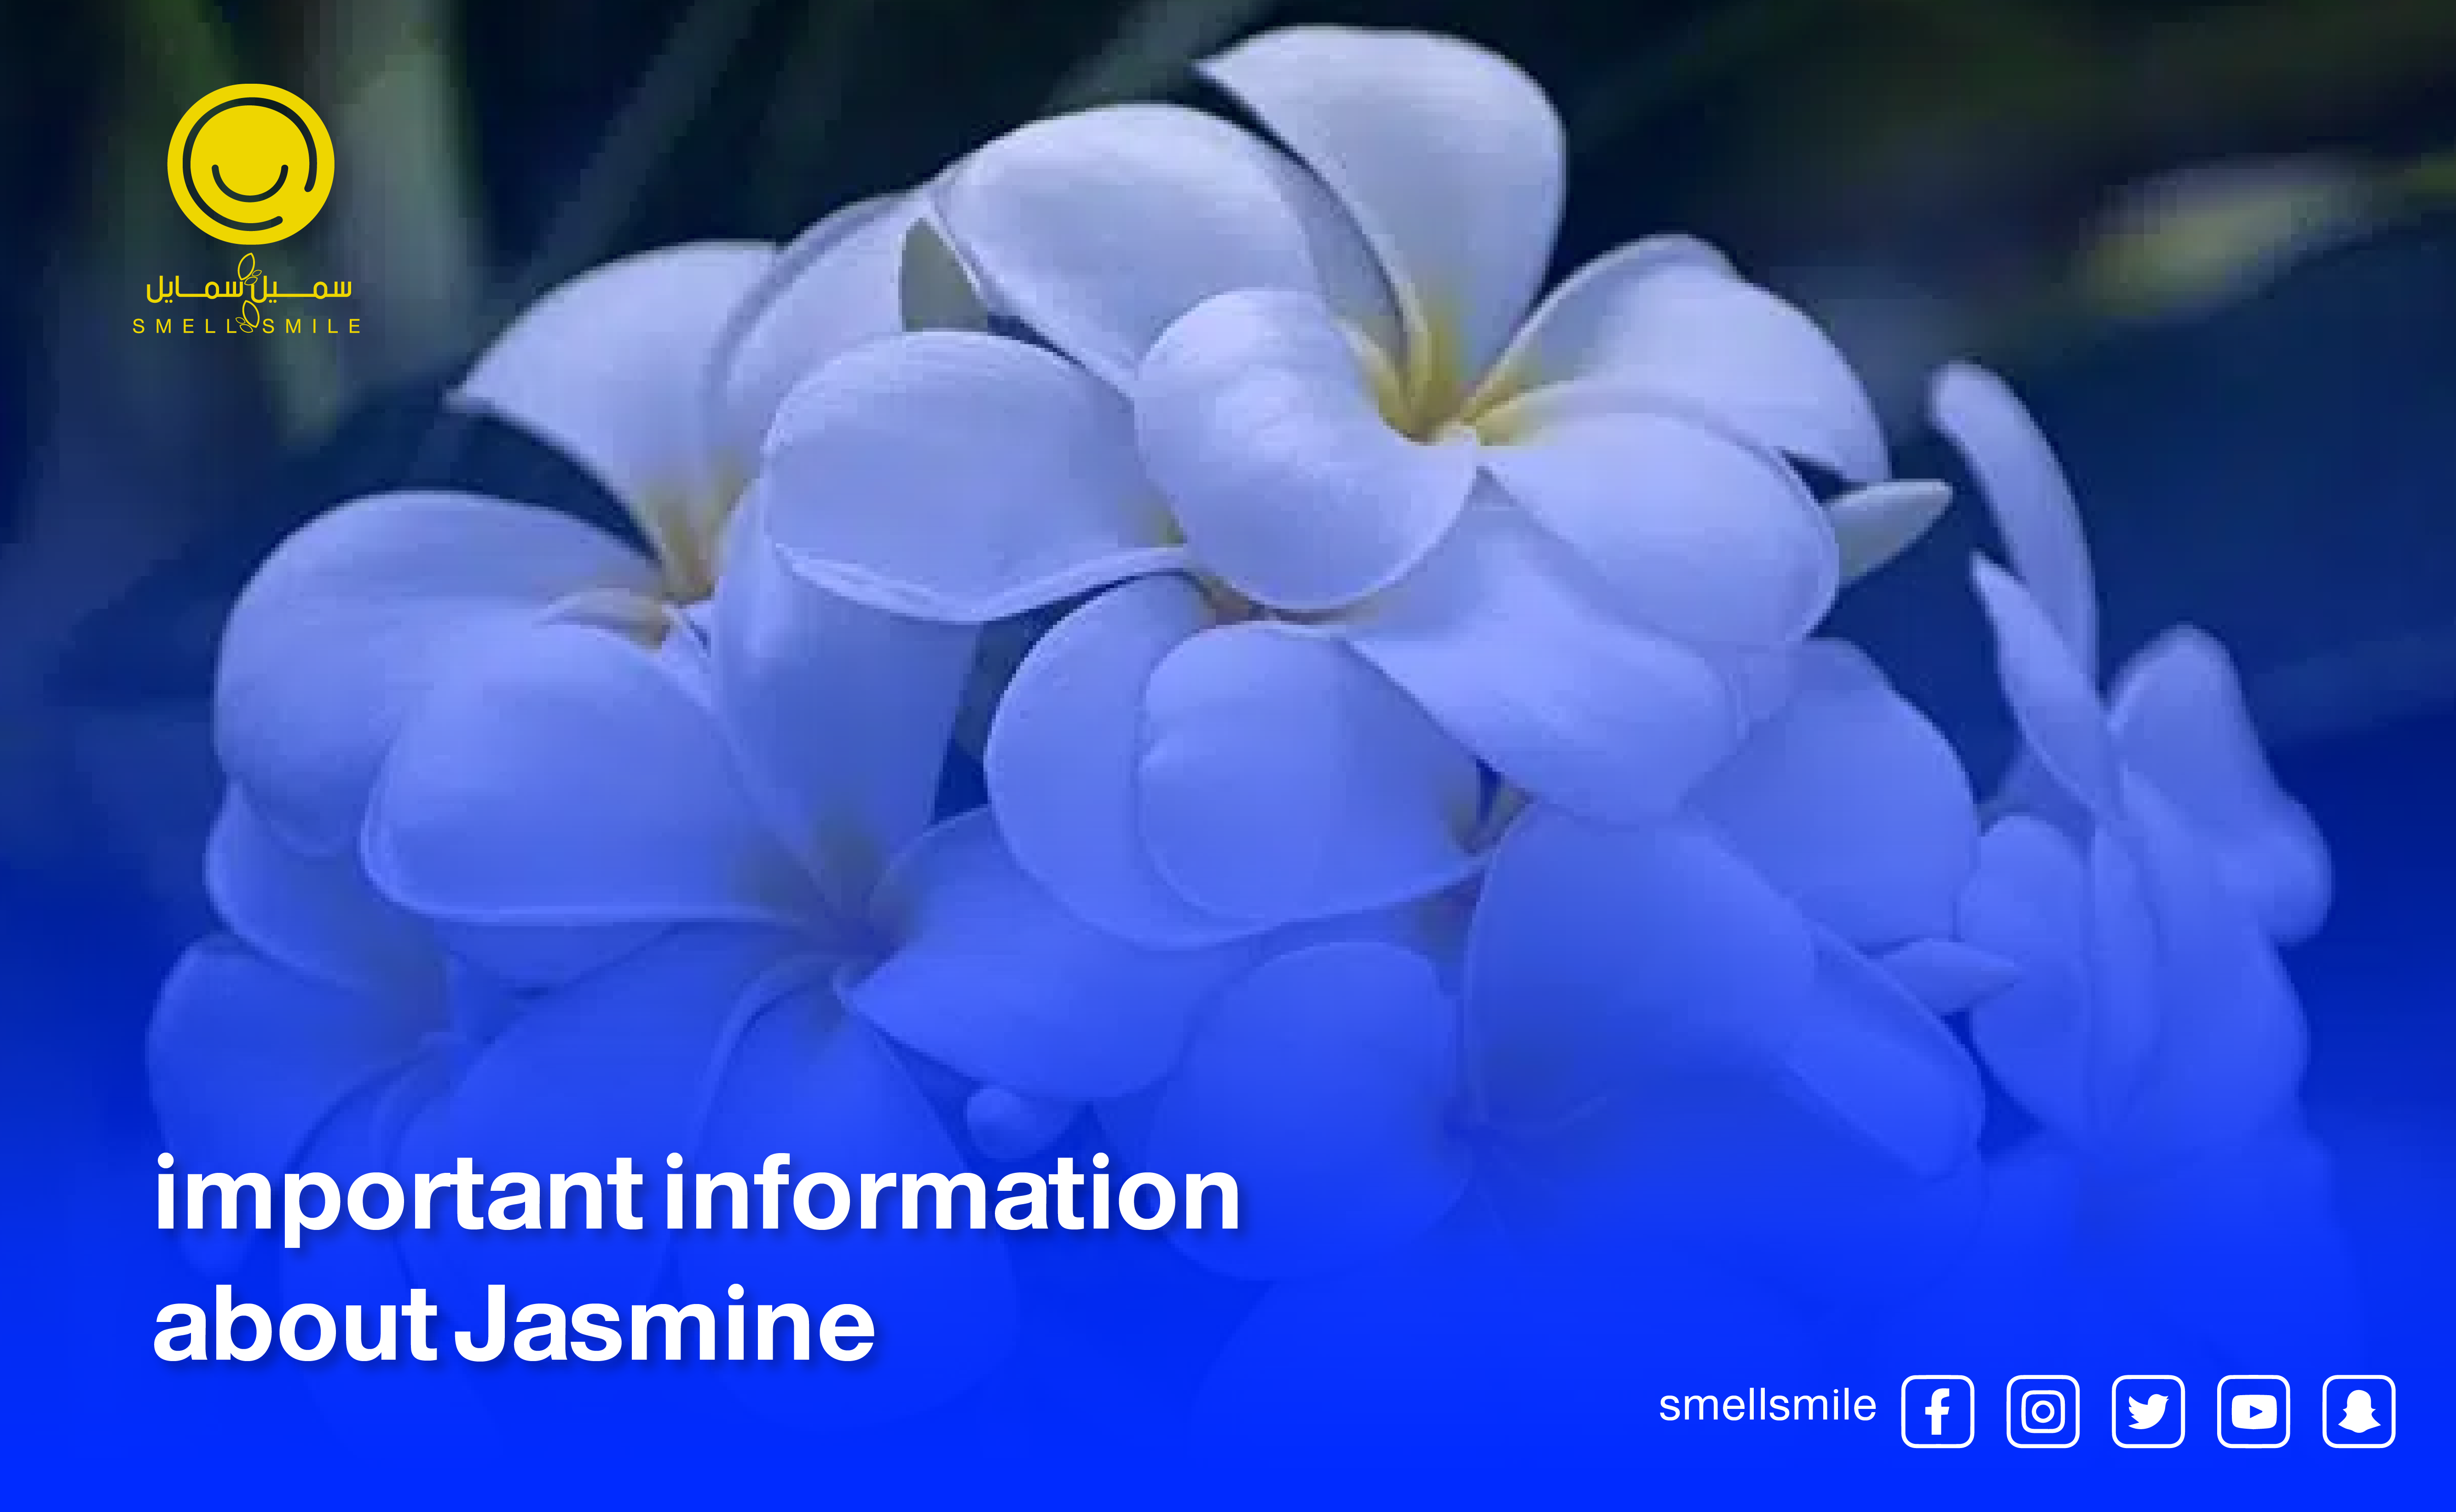 Important information about Jasmine